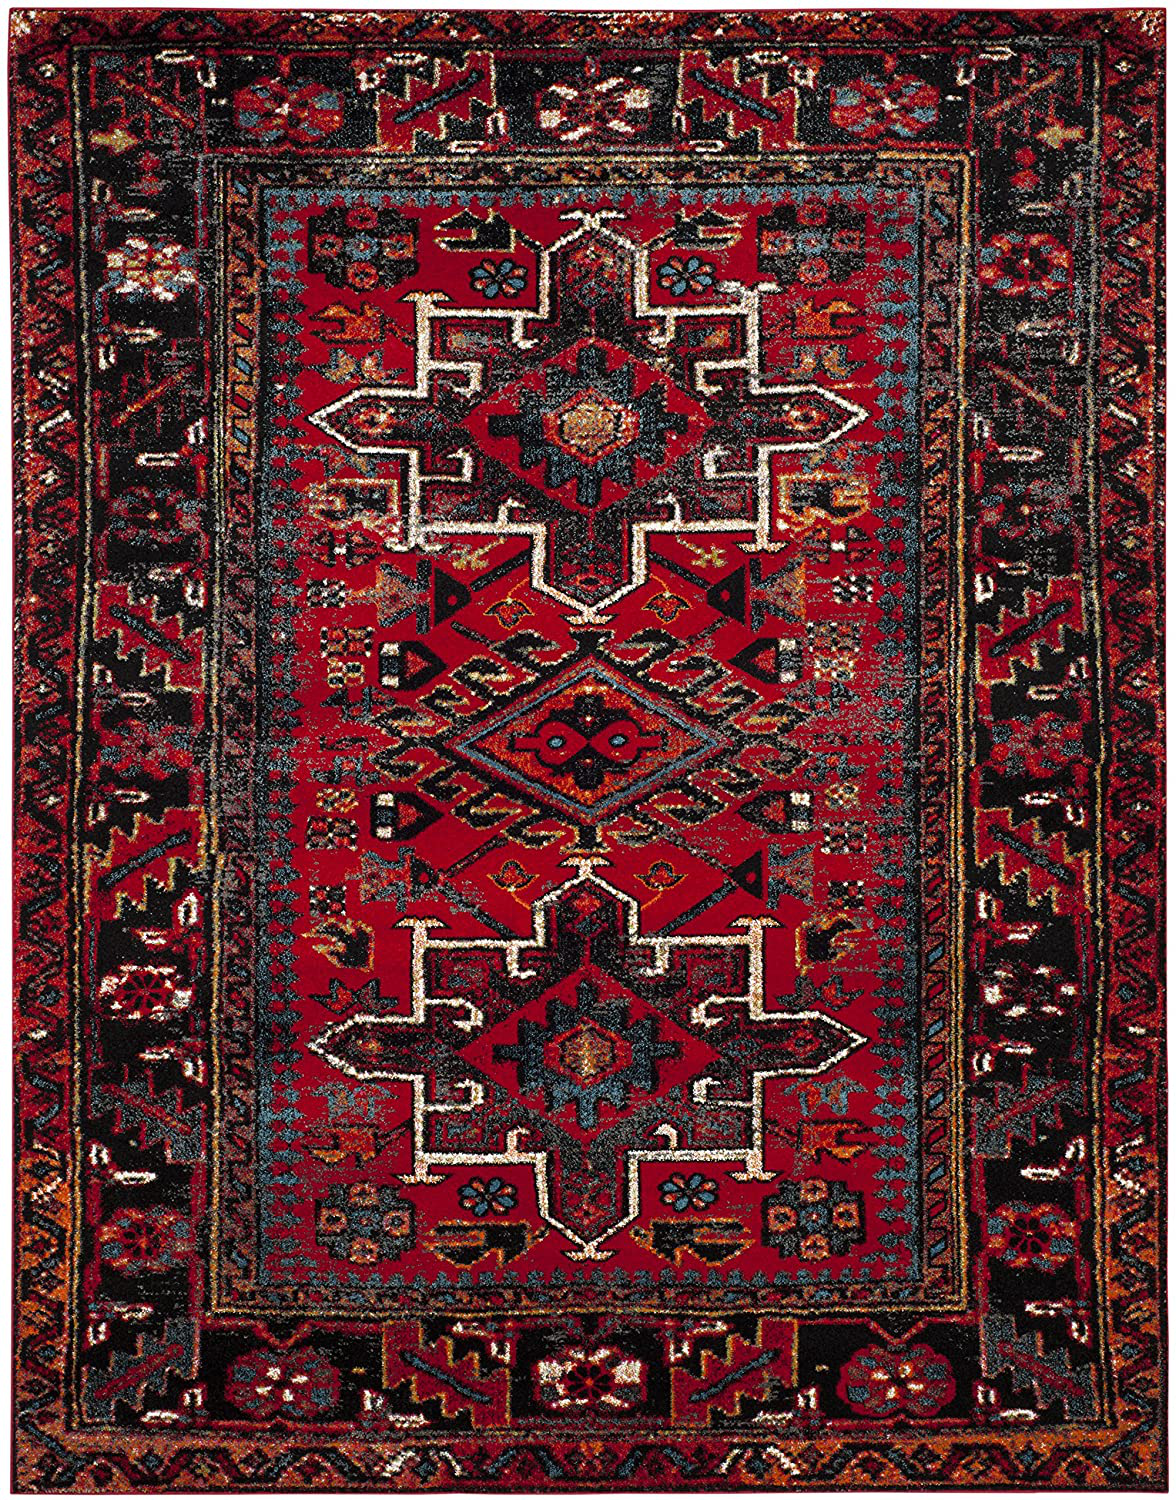 Safavieh Vintage Hamadan Collection VTH211A Oriental Traditional Persian Non-Shedding Stain Resistant Living Room Bedroom Area Rug, 3' x 3' Round, Red / Multi